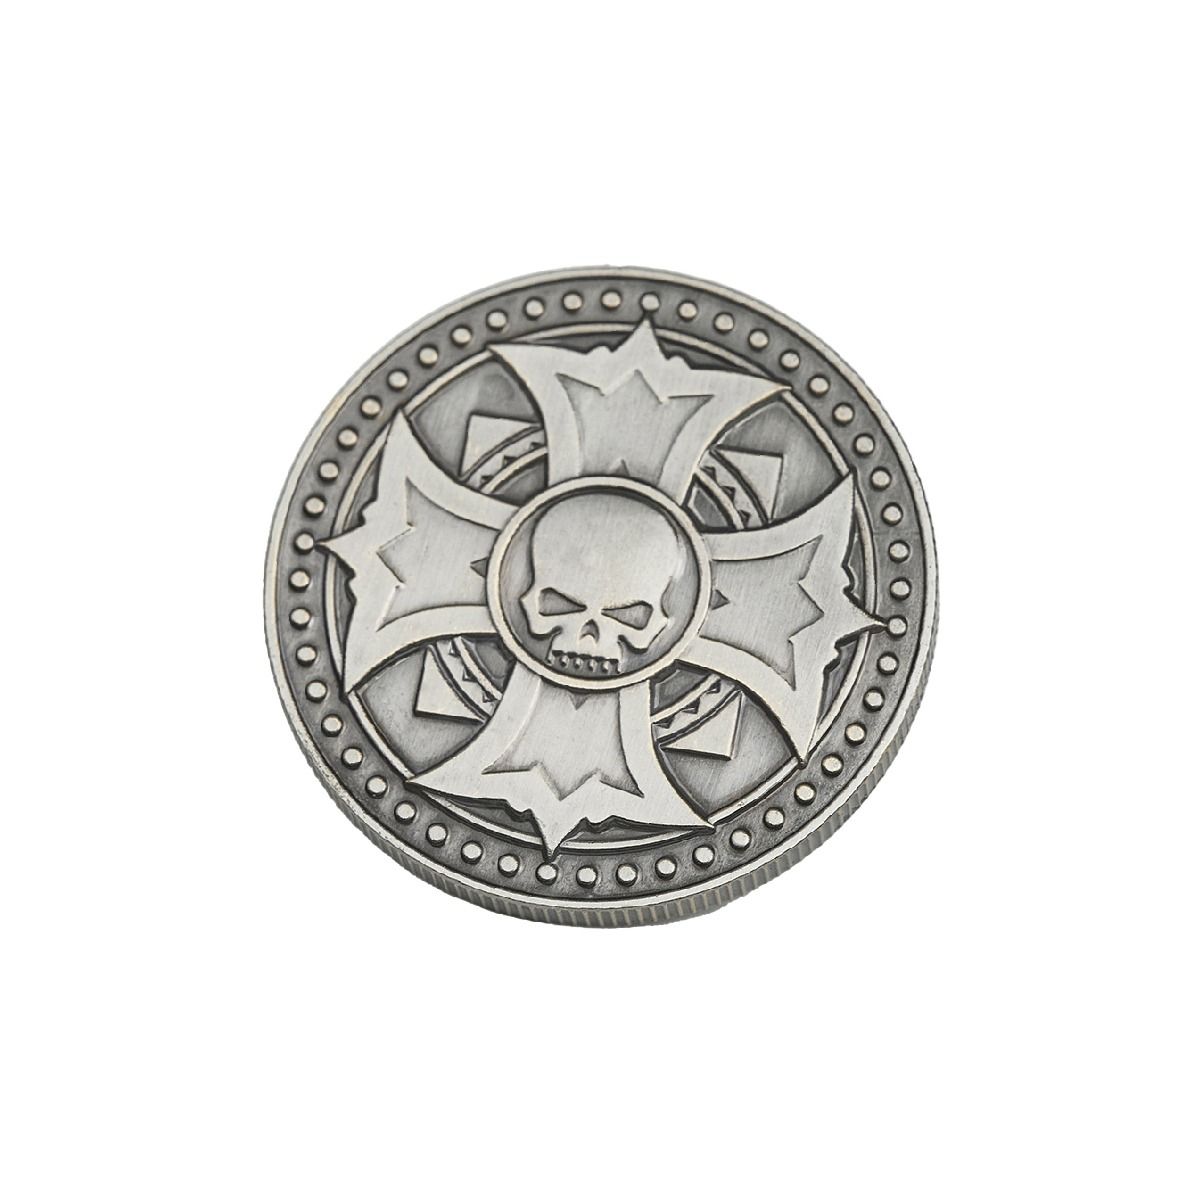 Buy Your Warhammer Total Empire Collectible Coin (Free Shipping) -